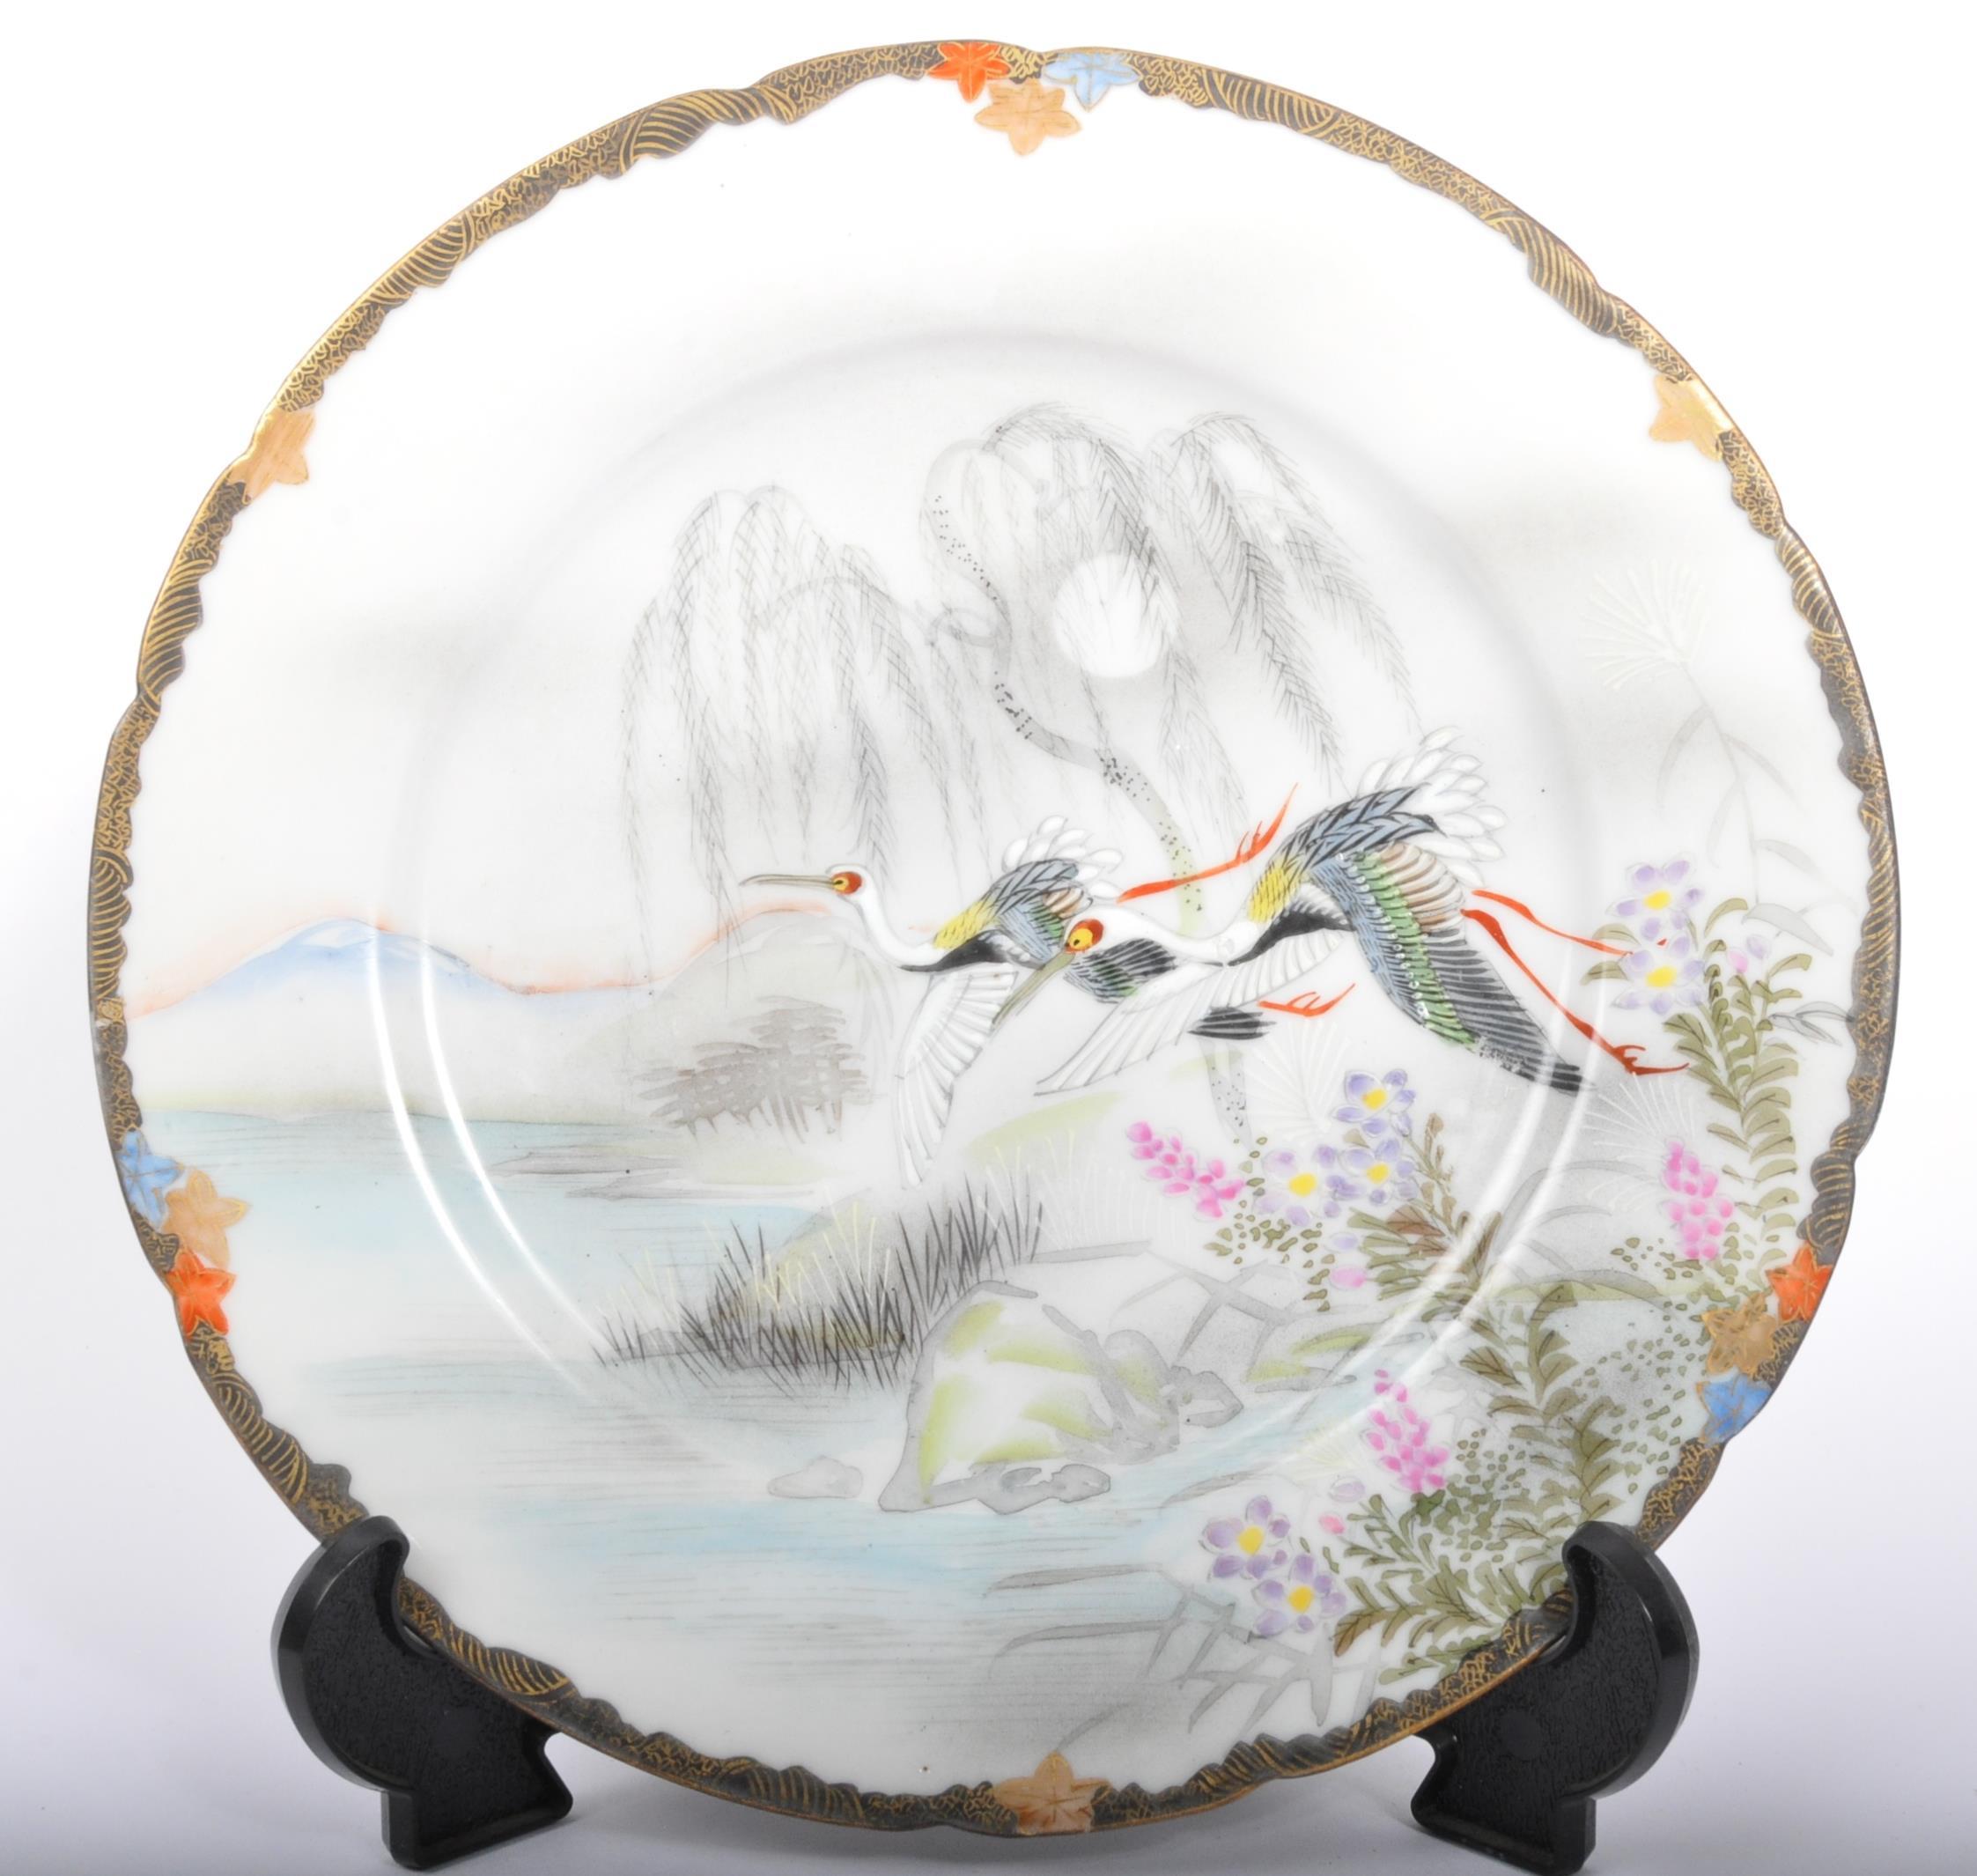 EARLY 20TH CENTURY JAPANESE PORCELAIN HAND PAINTED TEA SERVICE - Image 5 of 6